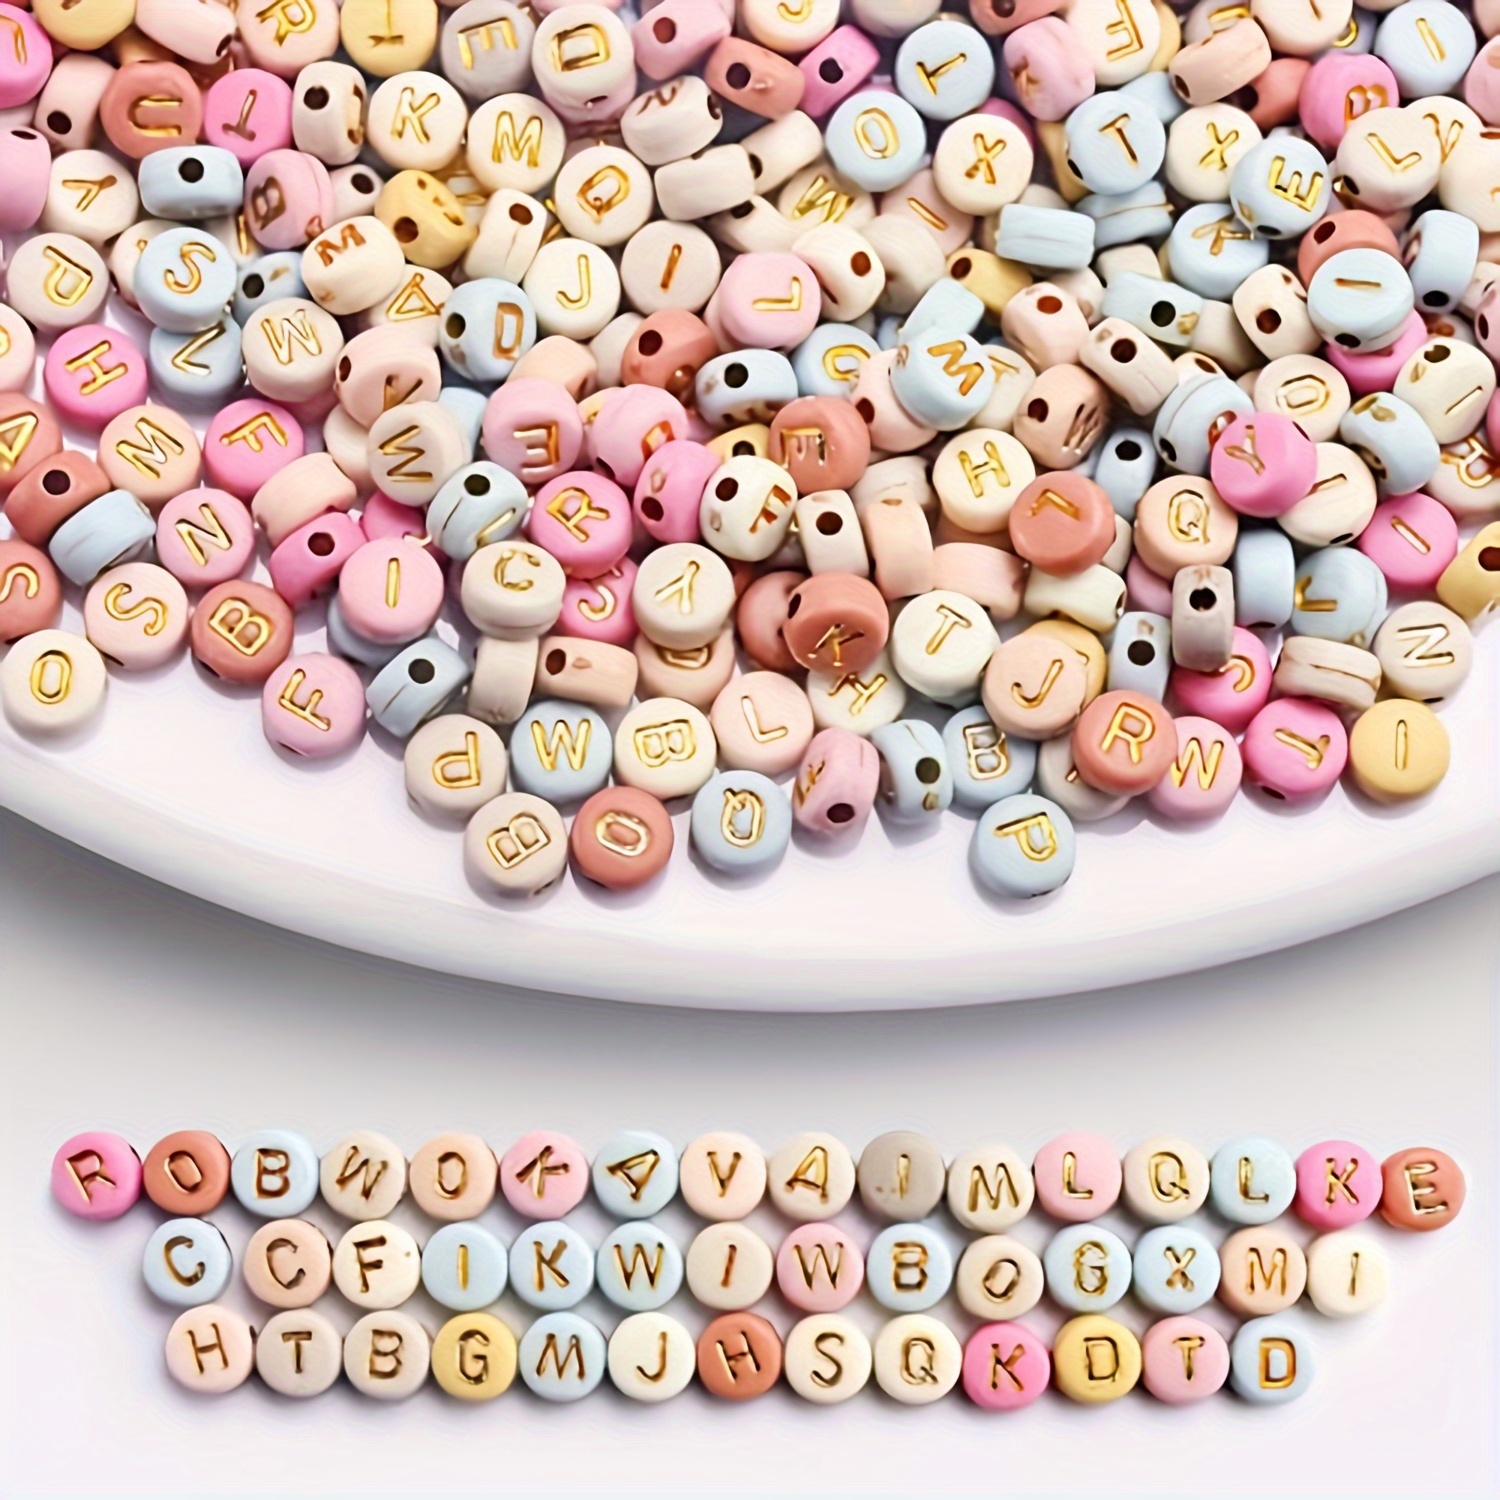 

1000pcs Acrylic Alphabet Beads, 7mm Colorful A-z Beaded Alphabet Beads With 600cm/236.22inch Invisible Nylon Cord For Diy Bracelets Keychains, Name Necklaces And Other Crafts